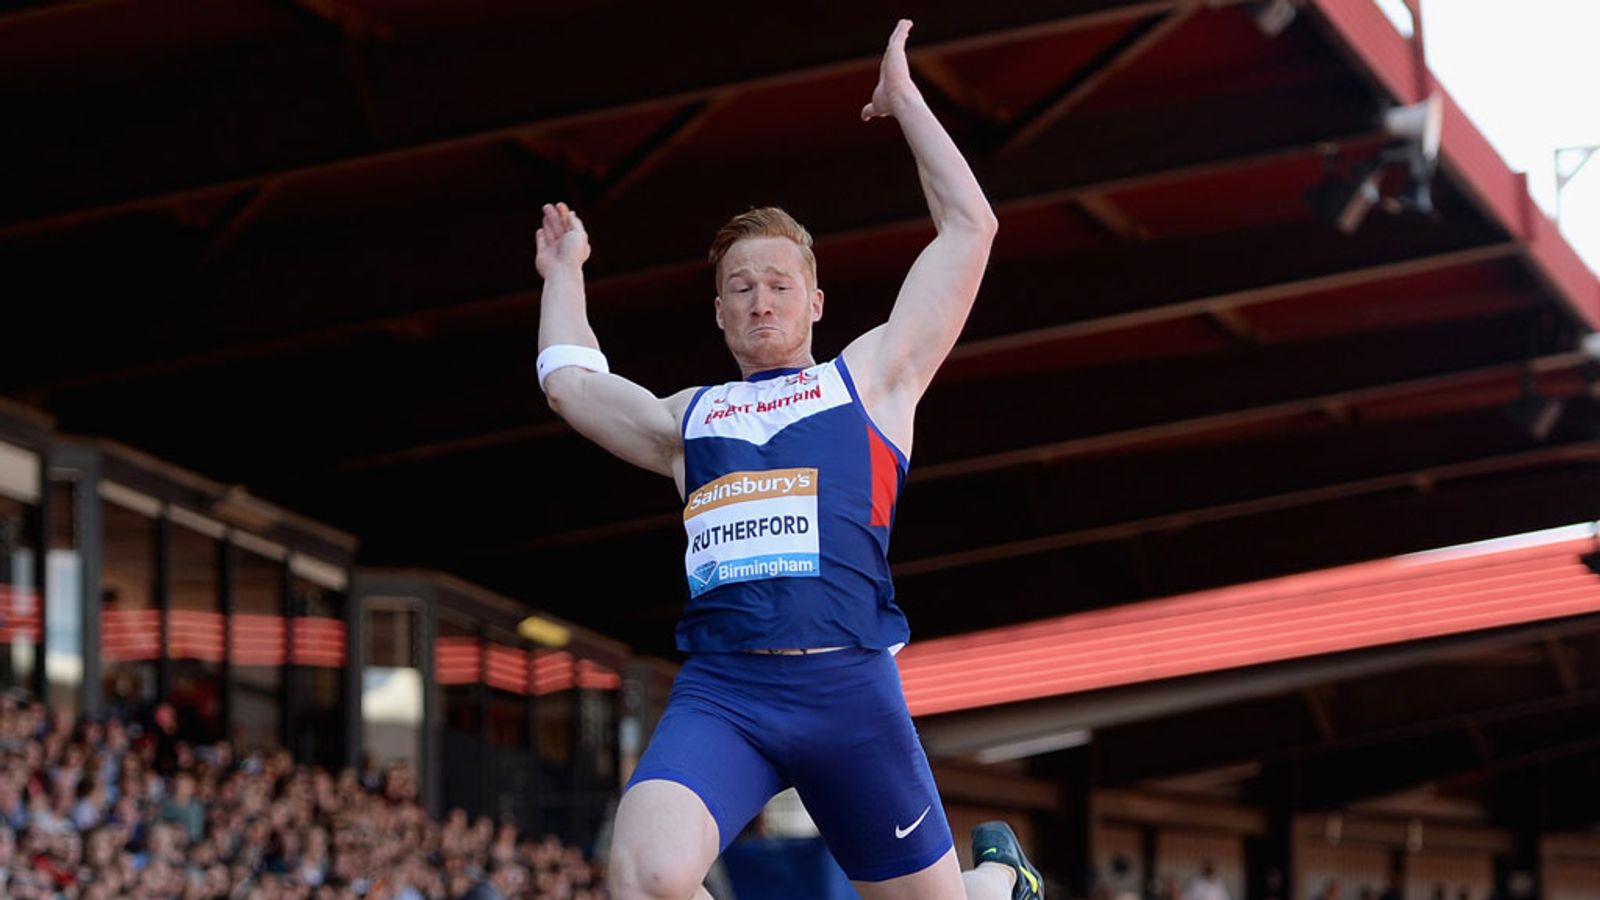 Greg Rutherford wins Stockholm long jump to stretch Diamond League lead